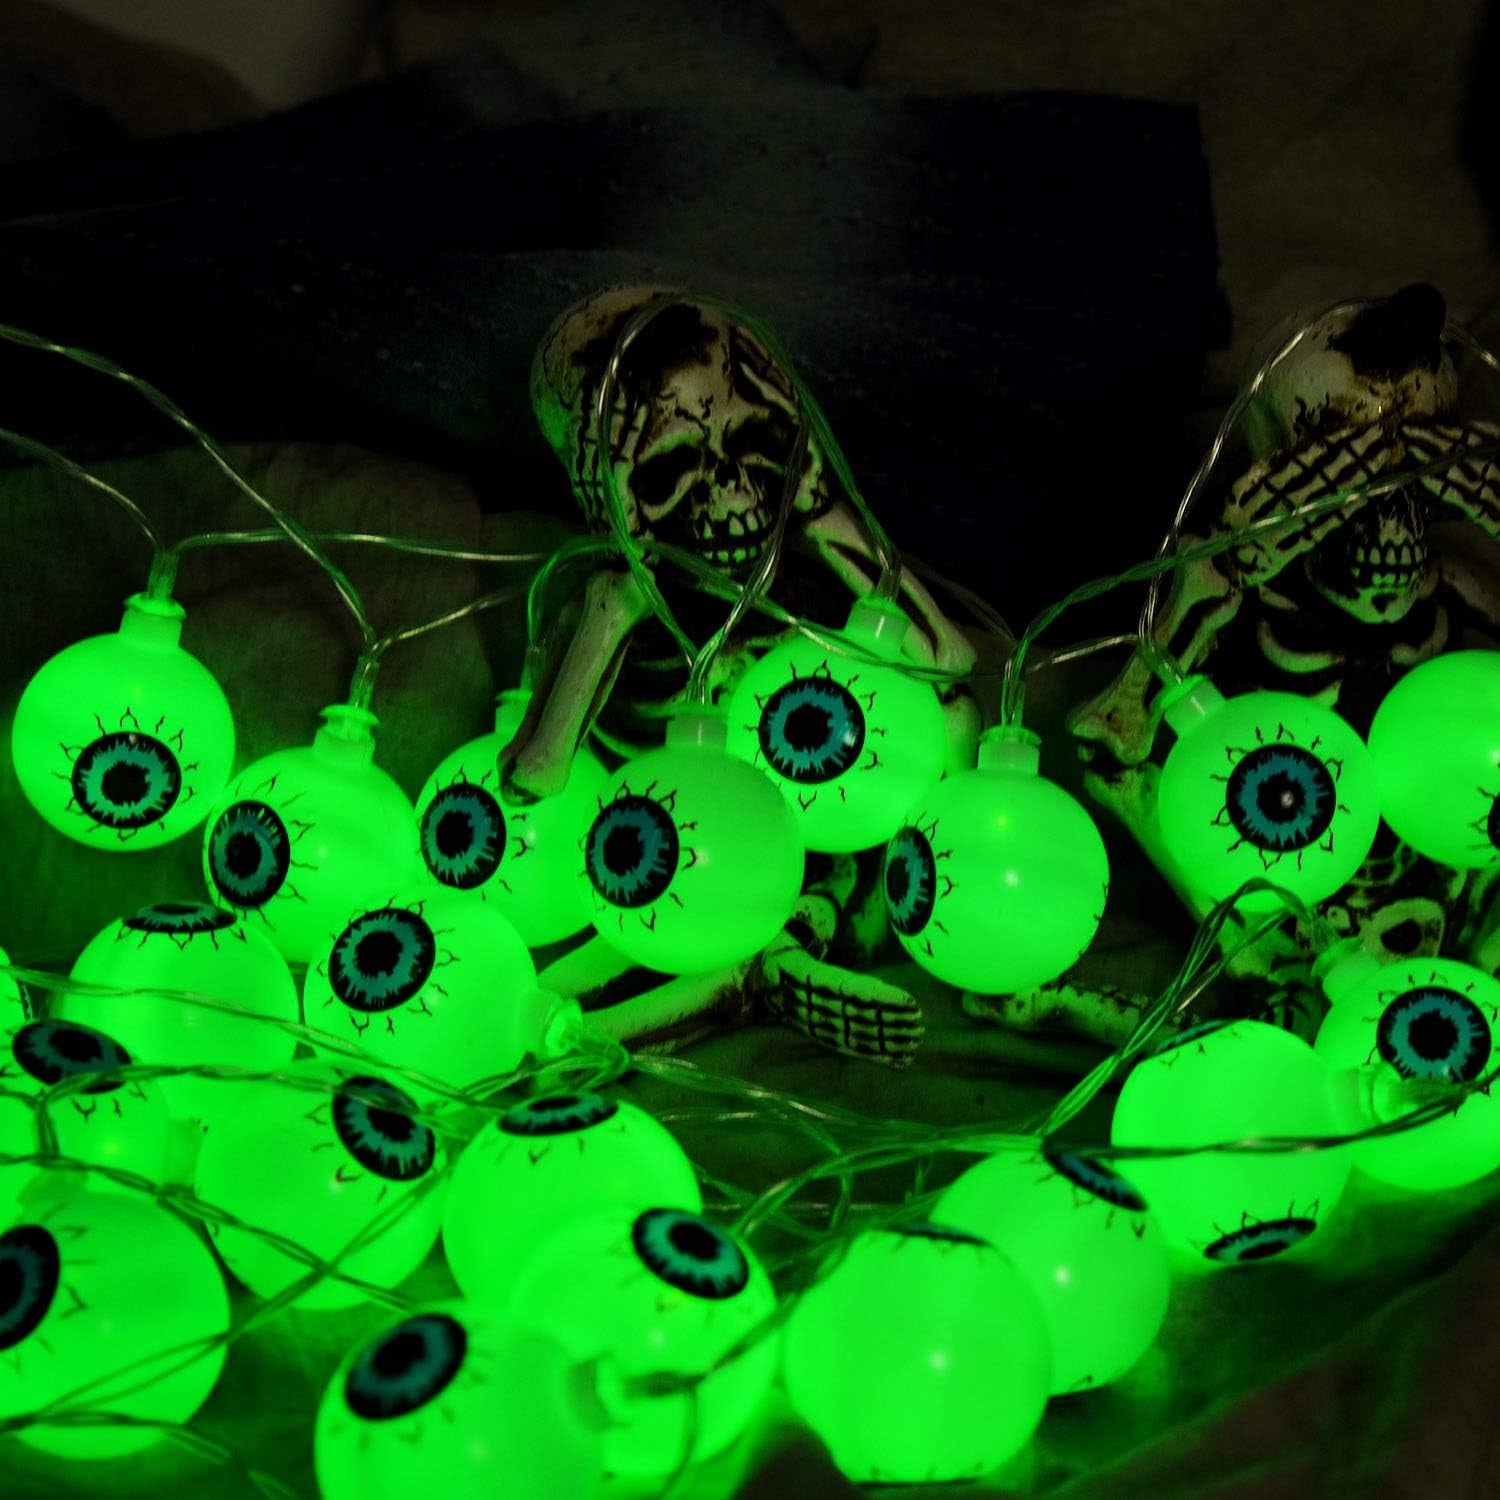 Halloween Eyeball String Lights, Halloween Decoration Cute Scary with 30 LED Eyeballs，Waterproof 8 Modes Twinkle Lights，Halloween Indoor/Outdoor for Party, House, Yard, Garden Decorations (Green)